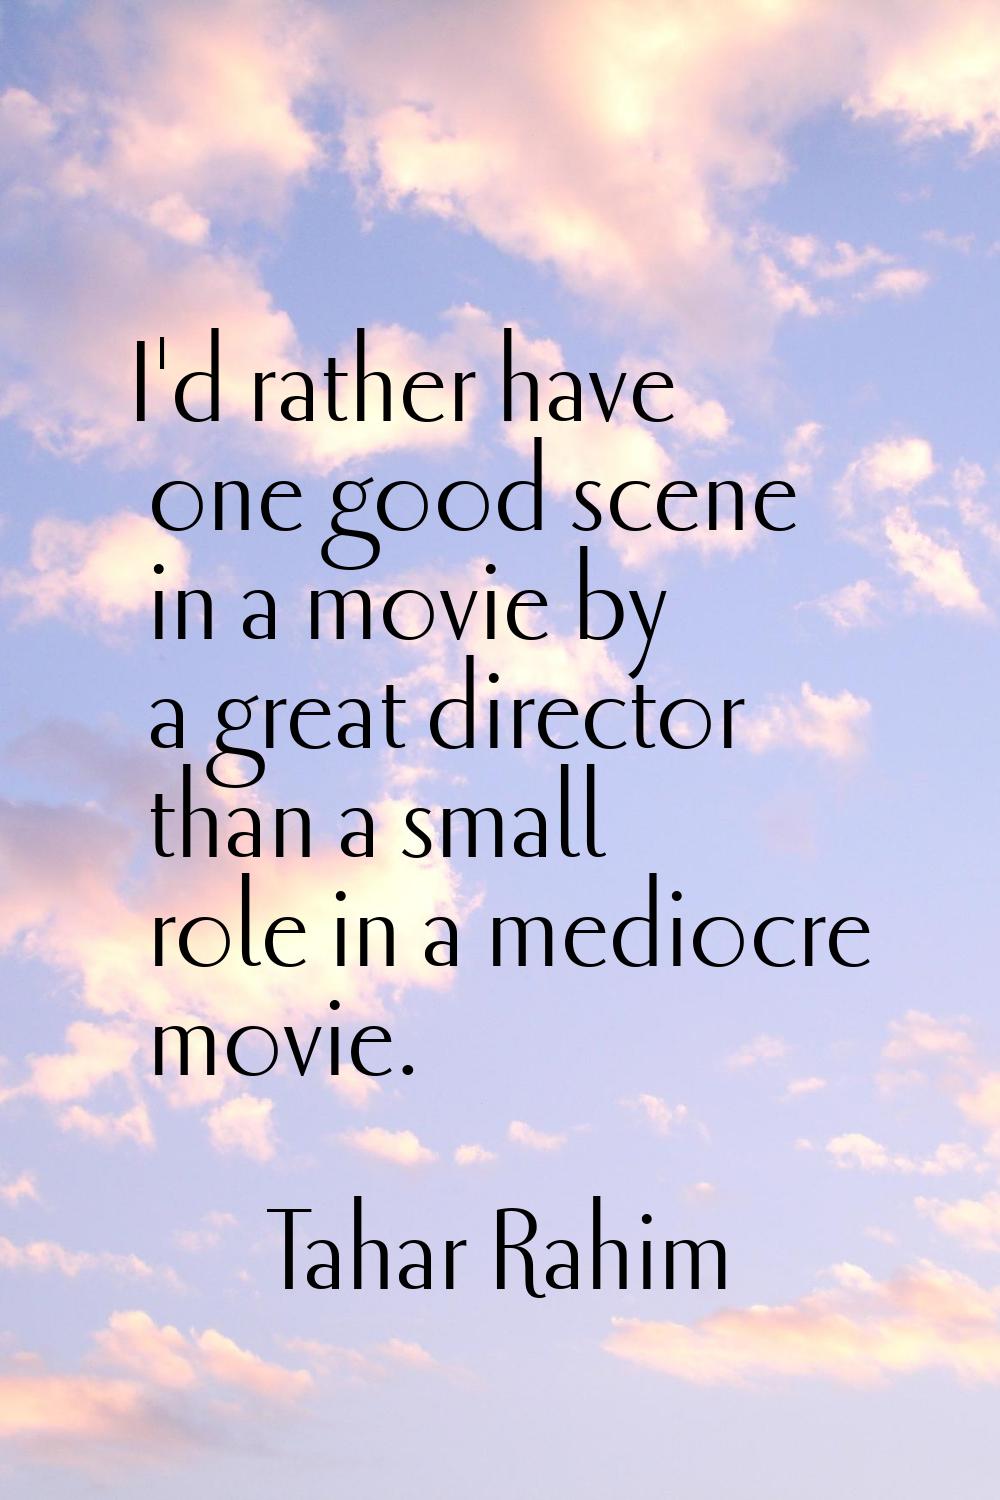 I'd rather have one good scene in a movie by a great director than a small role in a mediocre movie